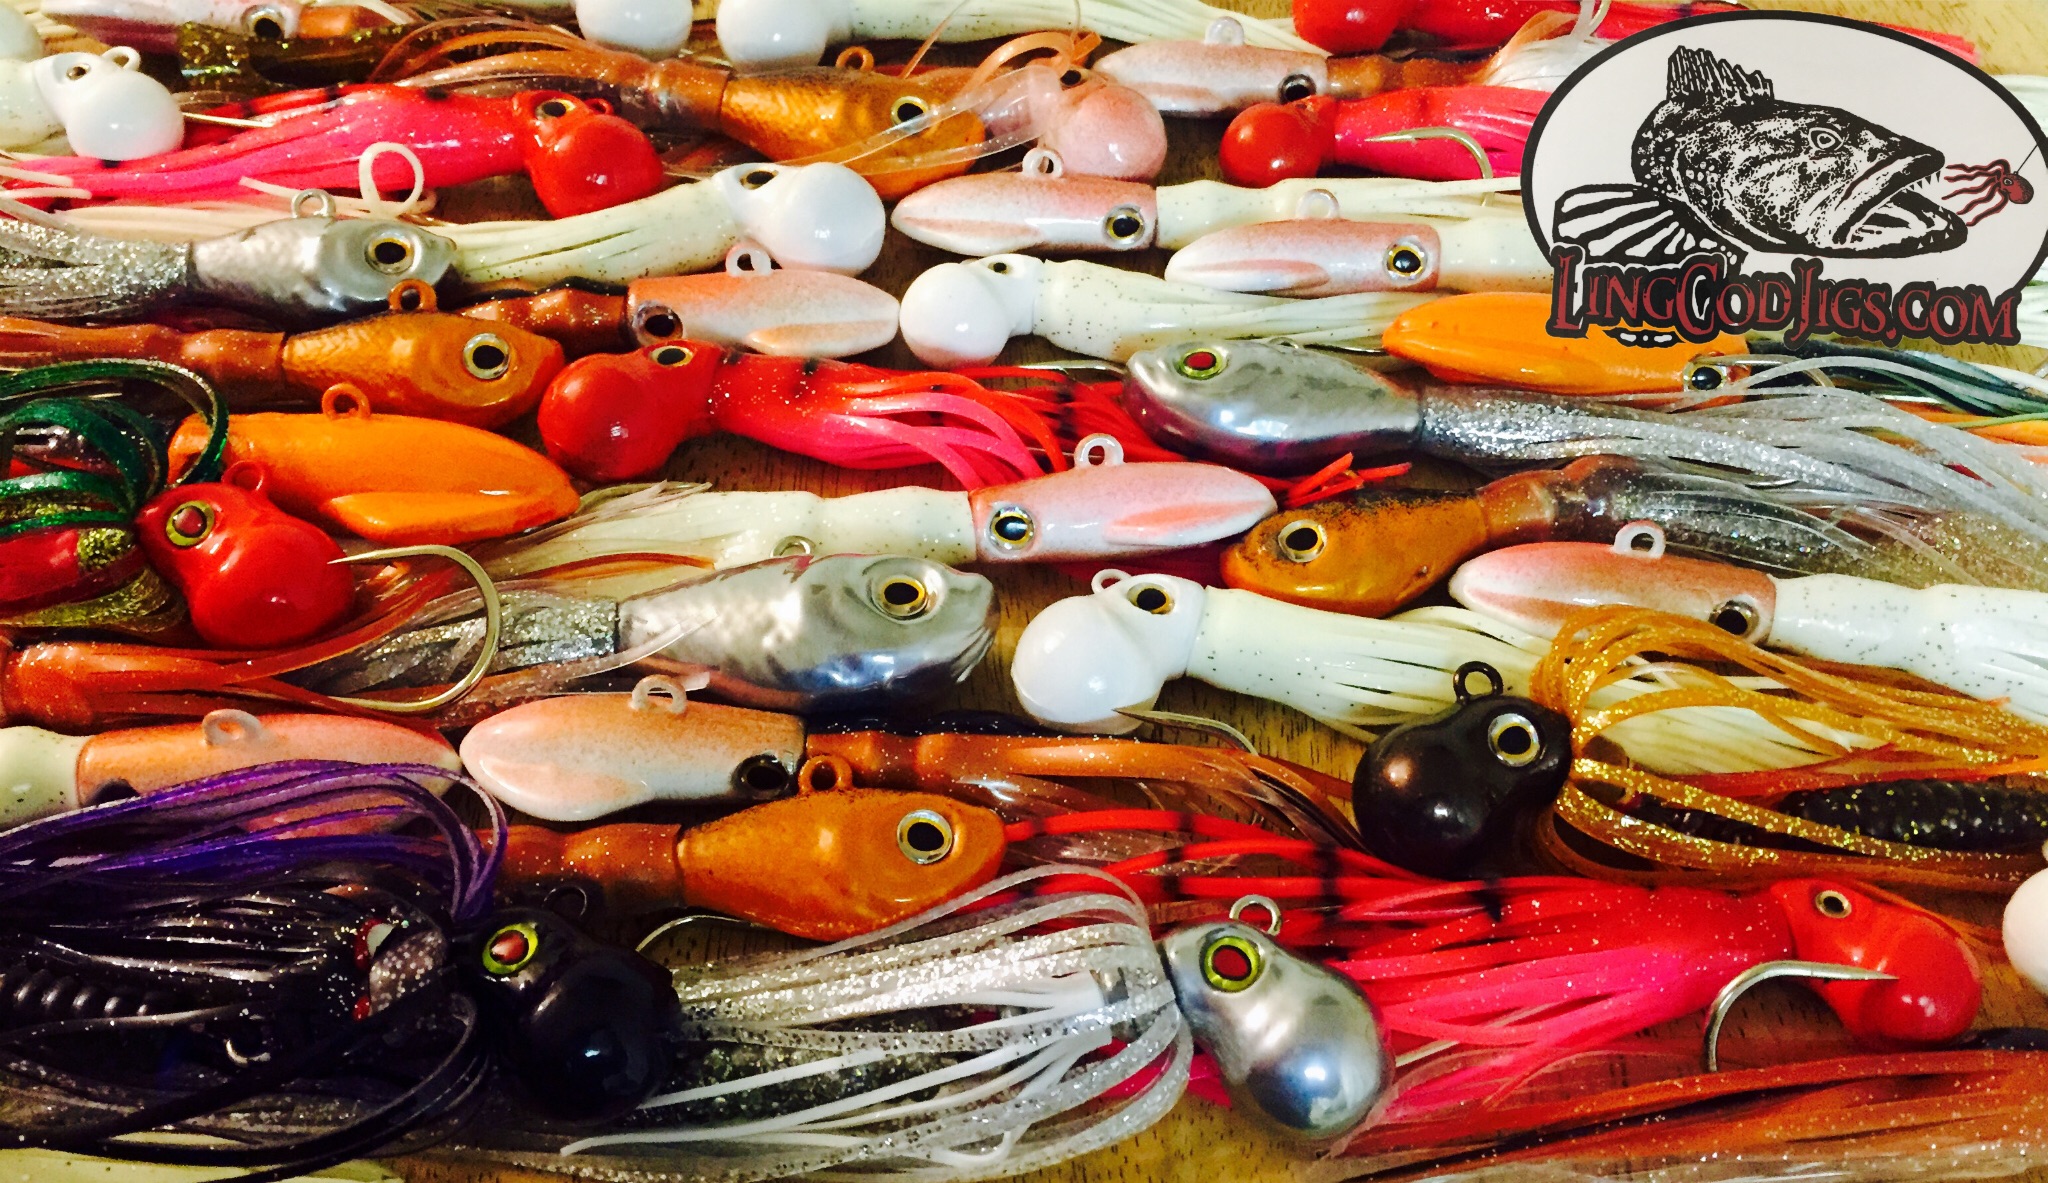 Whats the best Ling cod Jig? - Best Ling Cod jigs and luresBest Ling Cod  jigs and lures